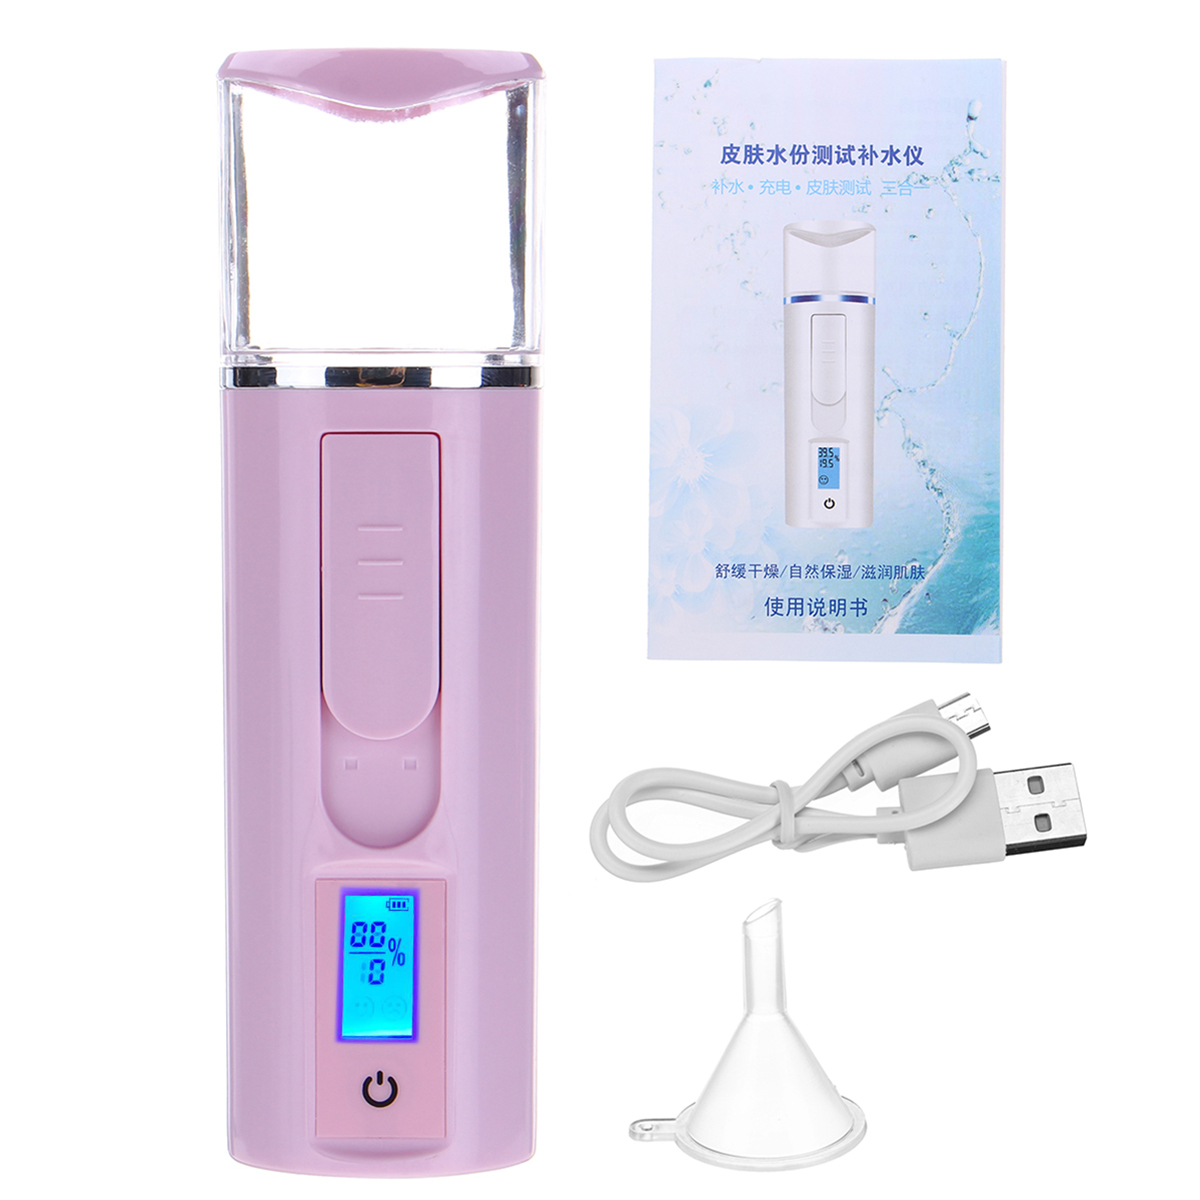 

3 IN 1 Nano Sprayer Water Meter USB Humidifier with Mobile Power Negative Ion Handheld Beauty Instrument